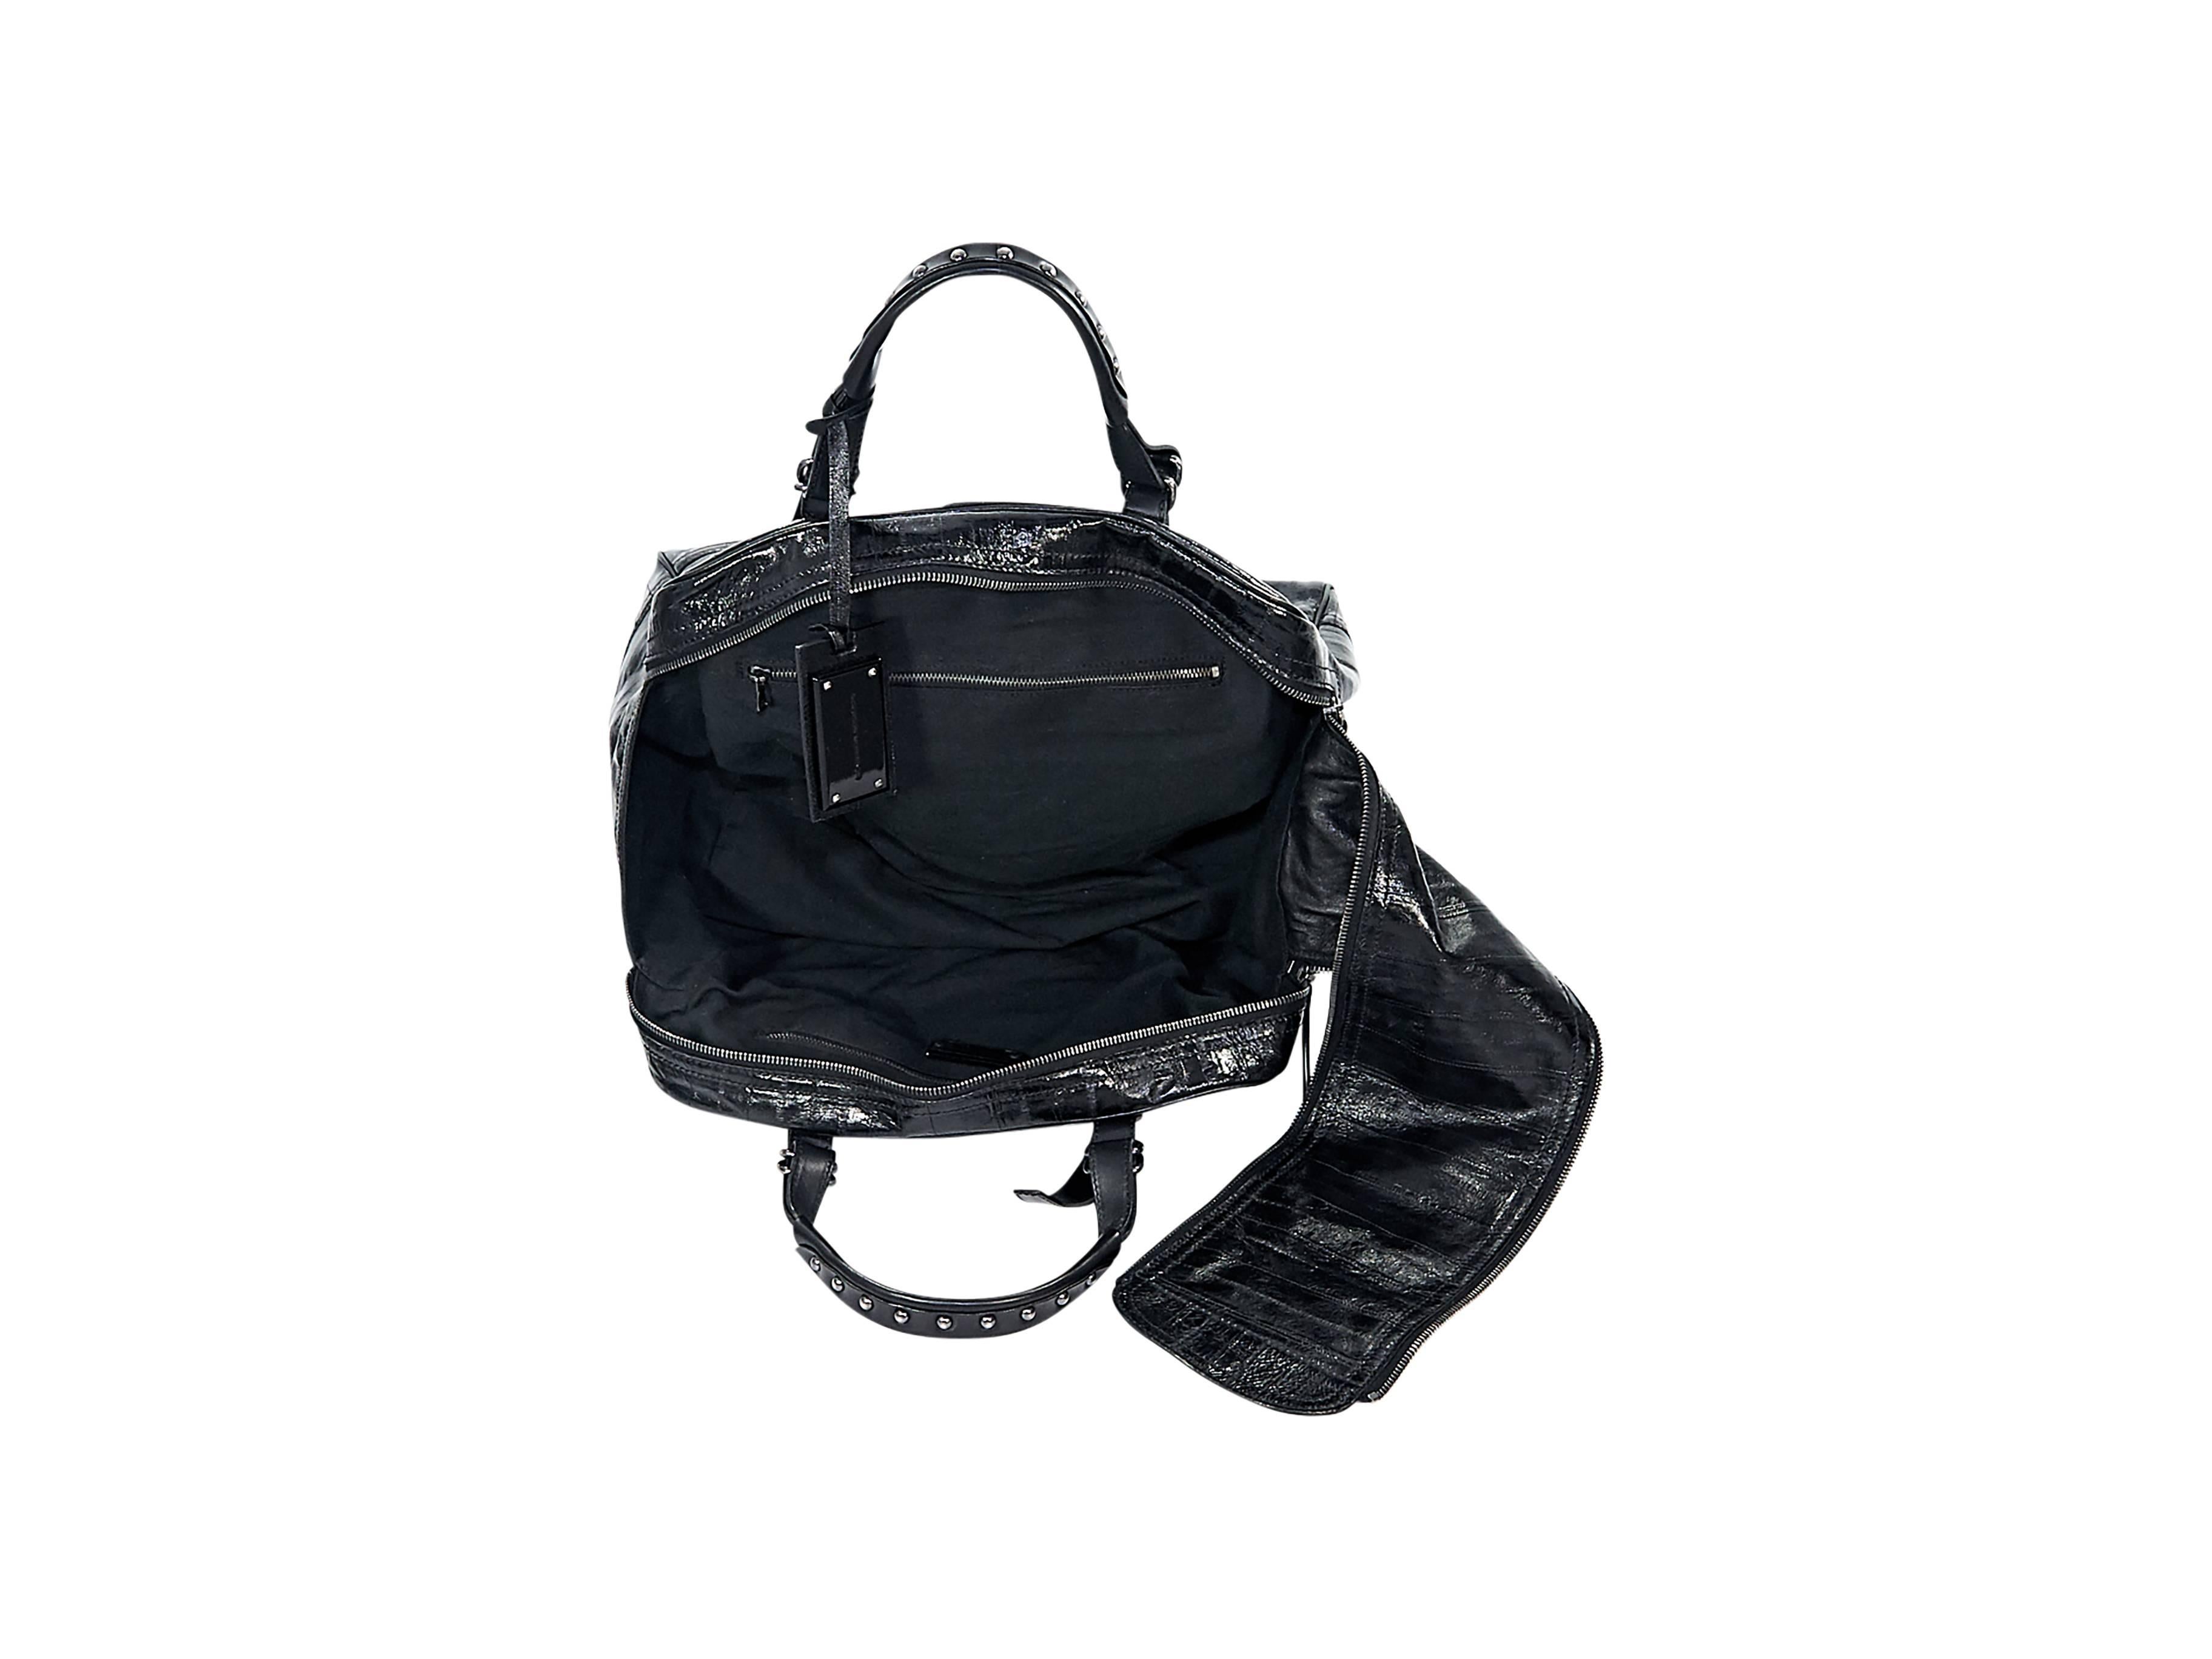 Product details:  Black patent leather handbag by Sigerson Morrison.  Studded dual carry handles.  Removable logo tag.  Double top zip closure.  Lined interior with inner zip pockets.  Protective metal feet.  Silvertone hardware.  13.5